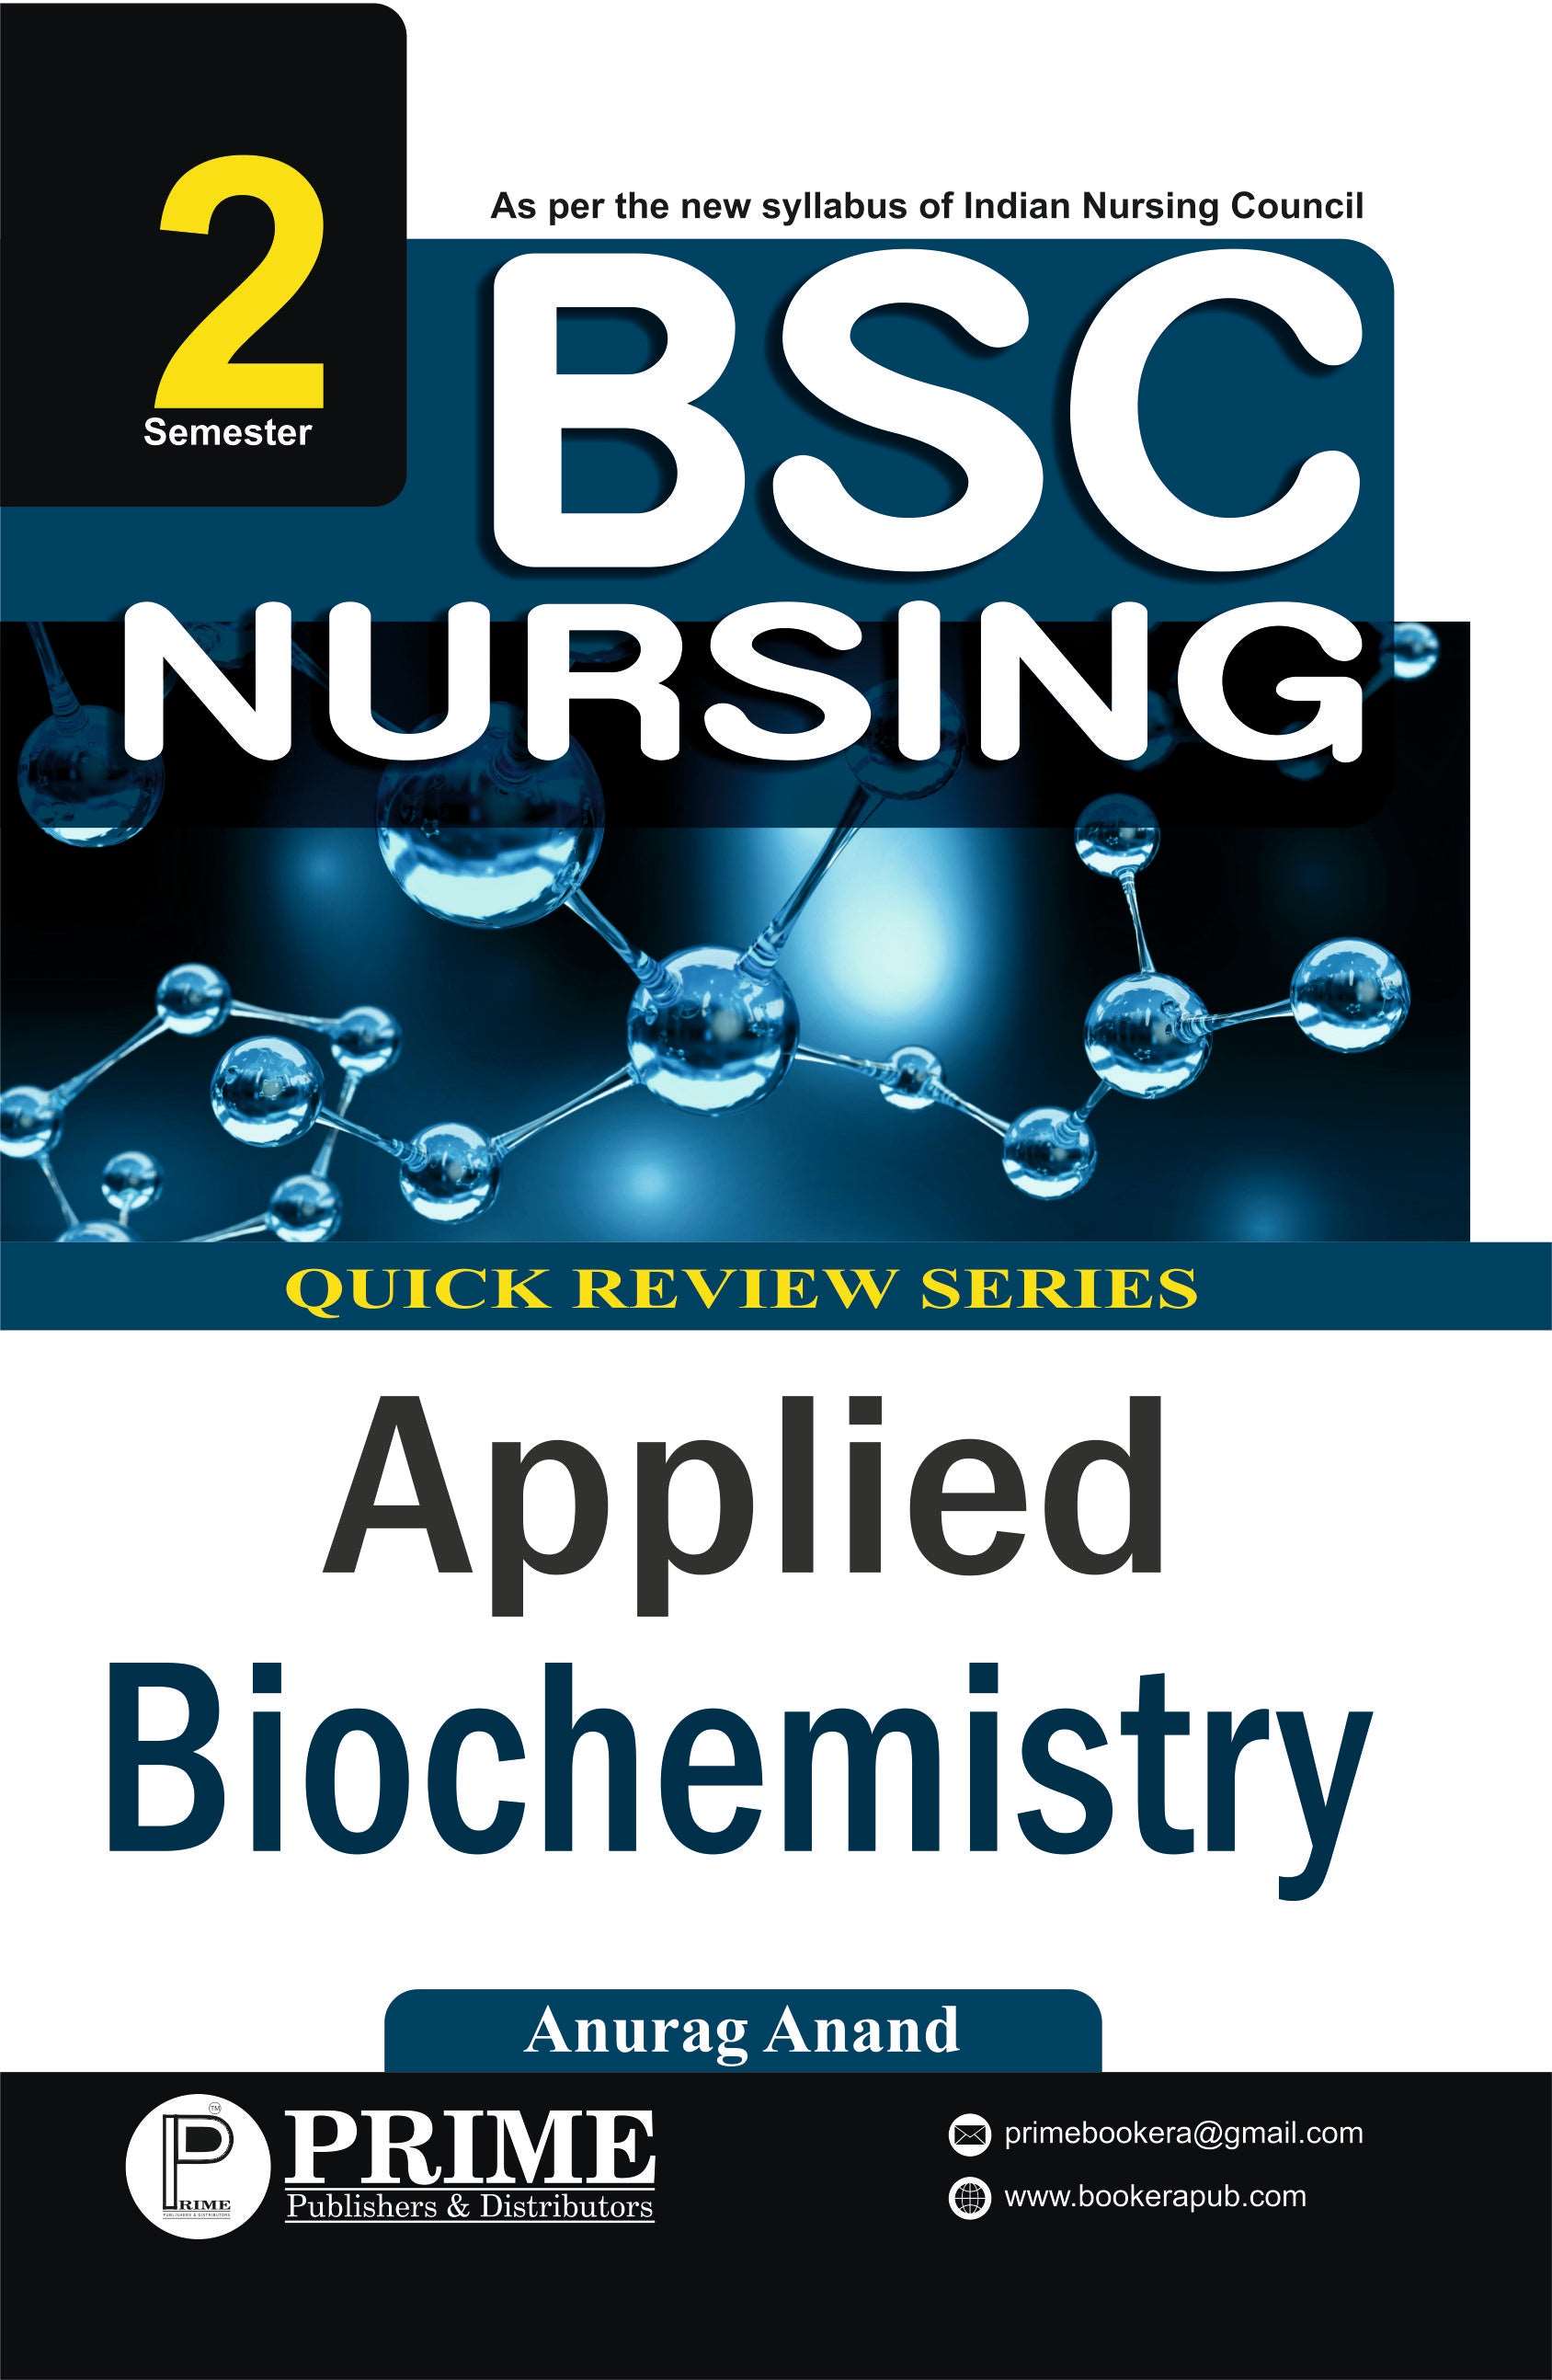 Quick Review Series of Applied Biochemistry